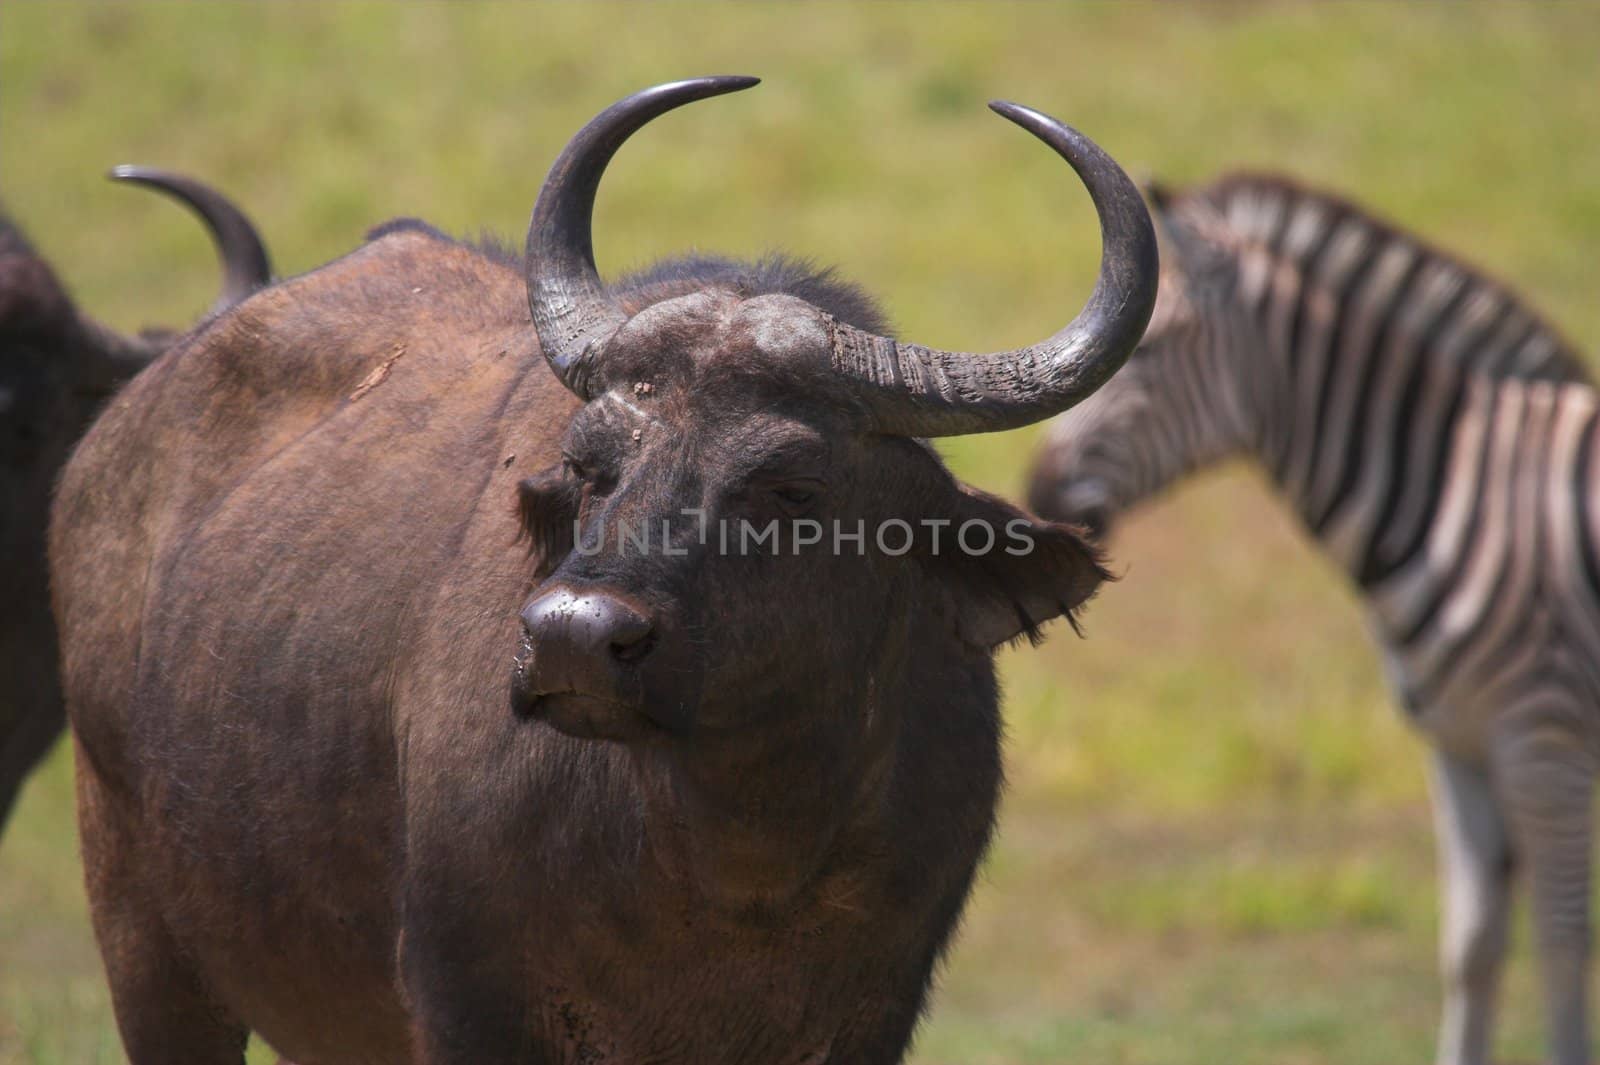 Cape Buffalo with Zebra in the background